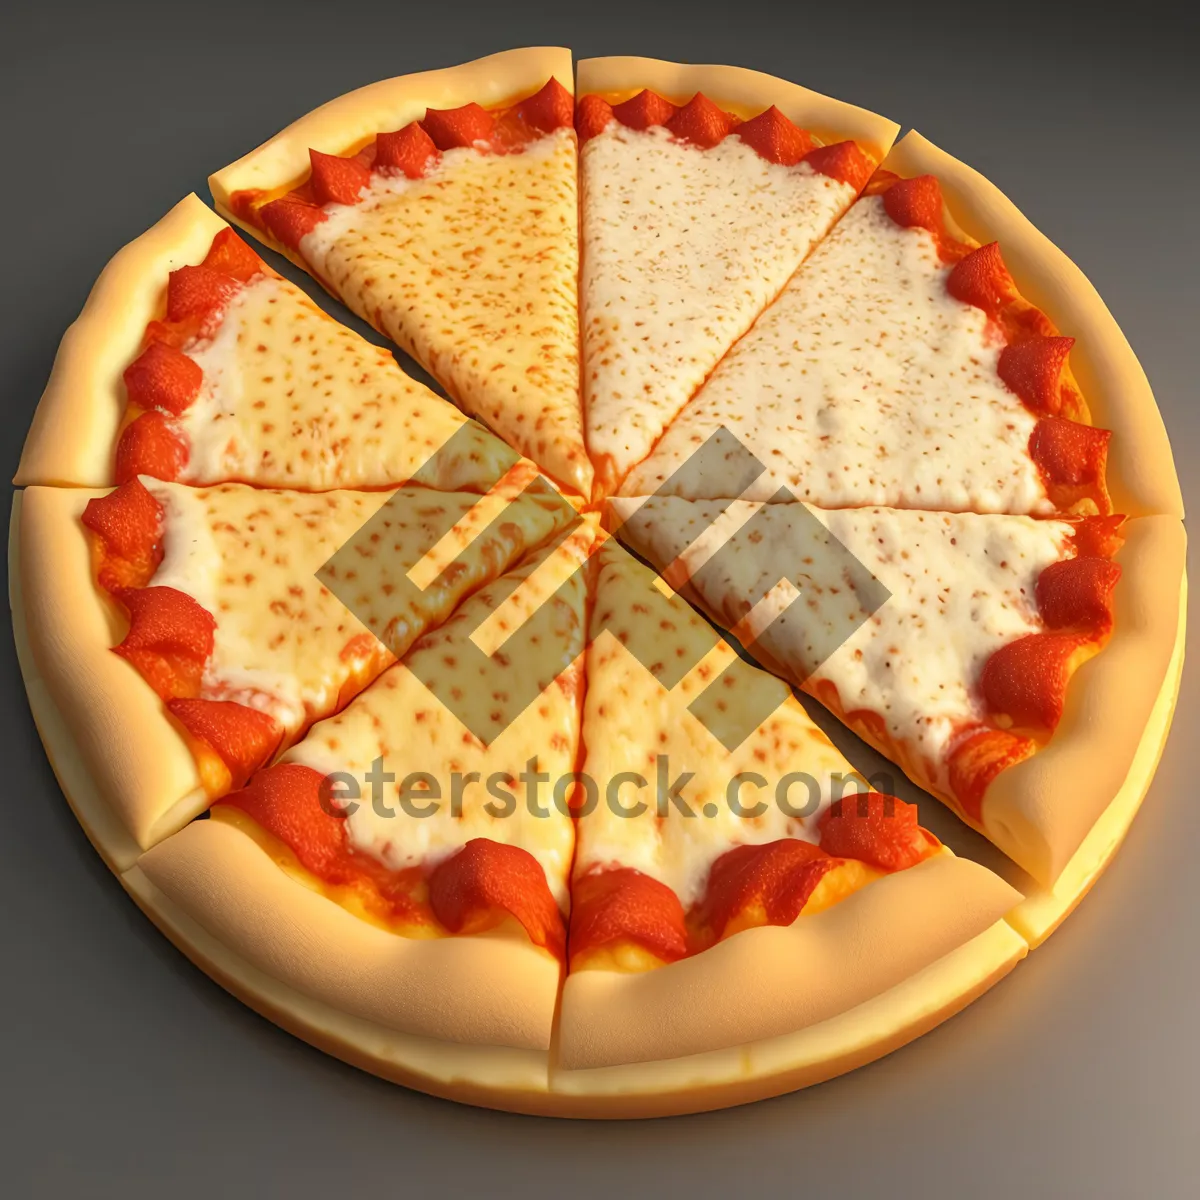 Picture of Delicious Gourmet Pizza Slice with Mandarin